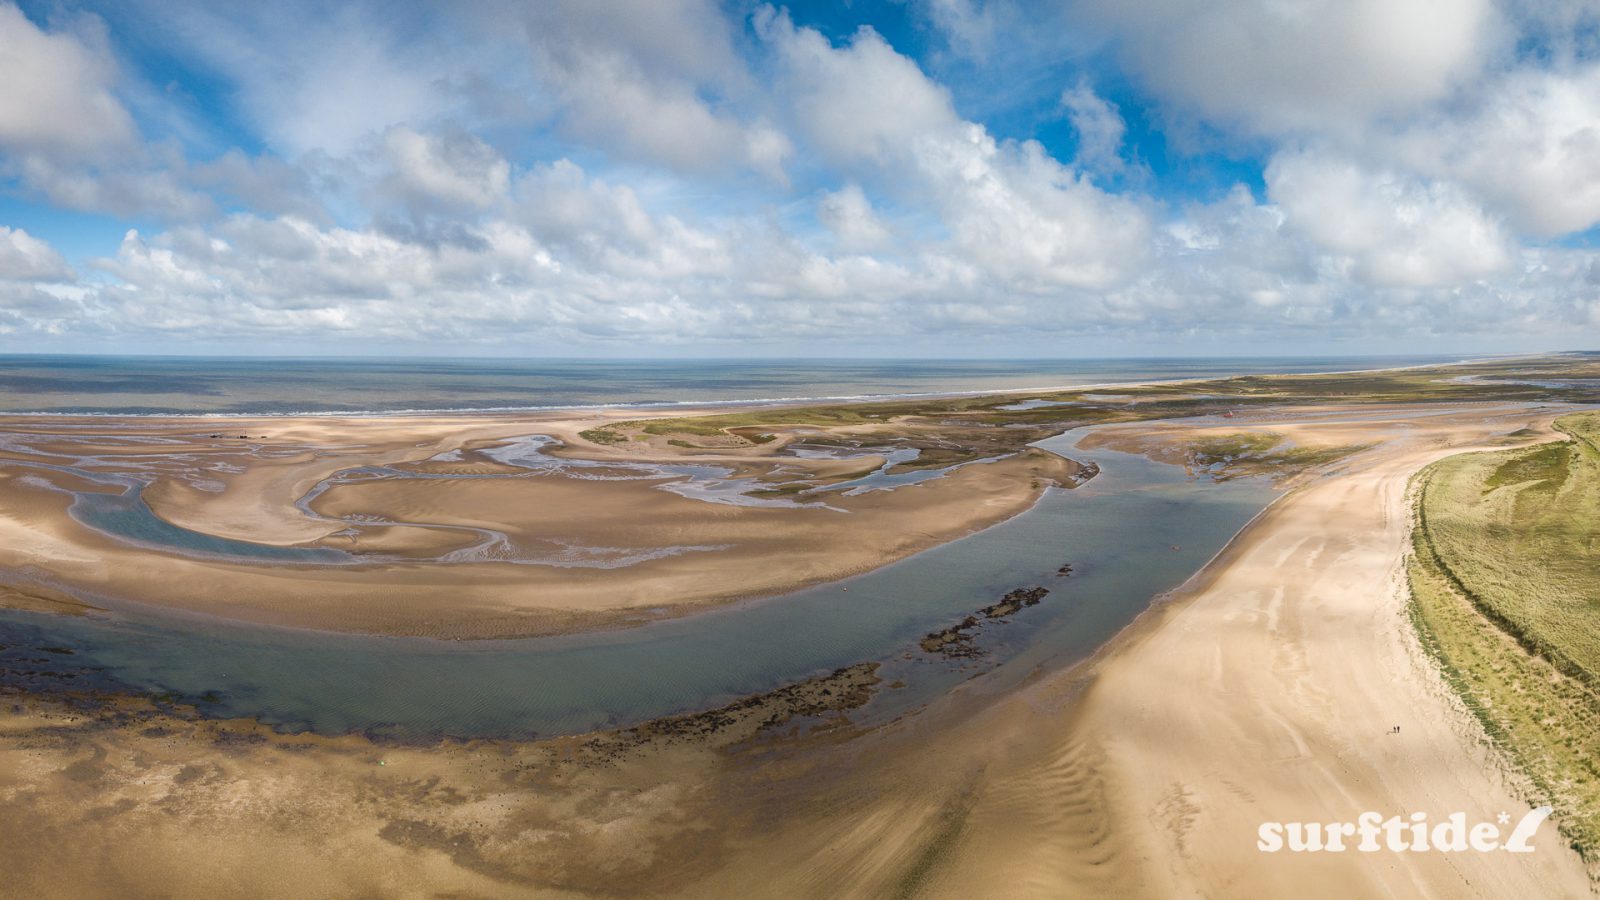 Aerial photo of Brancaster beach at low tide showing the vast expanse of sand and water draining back into the sea